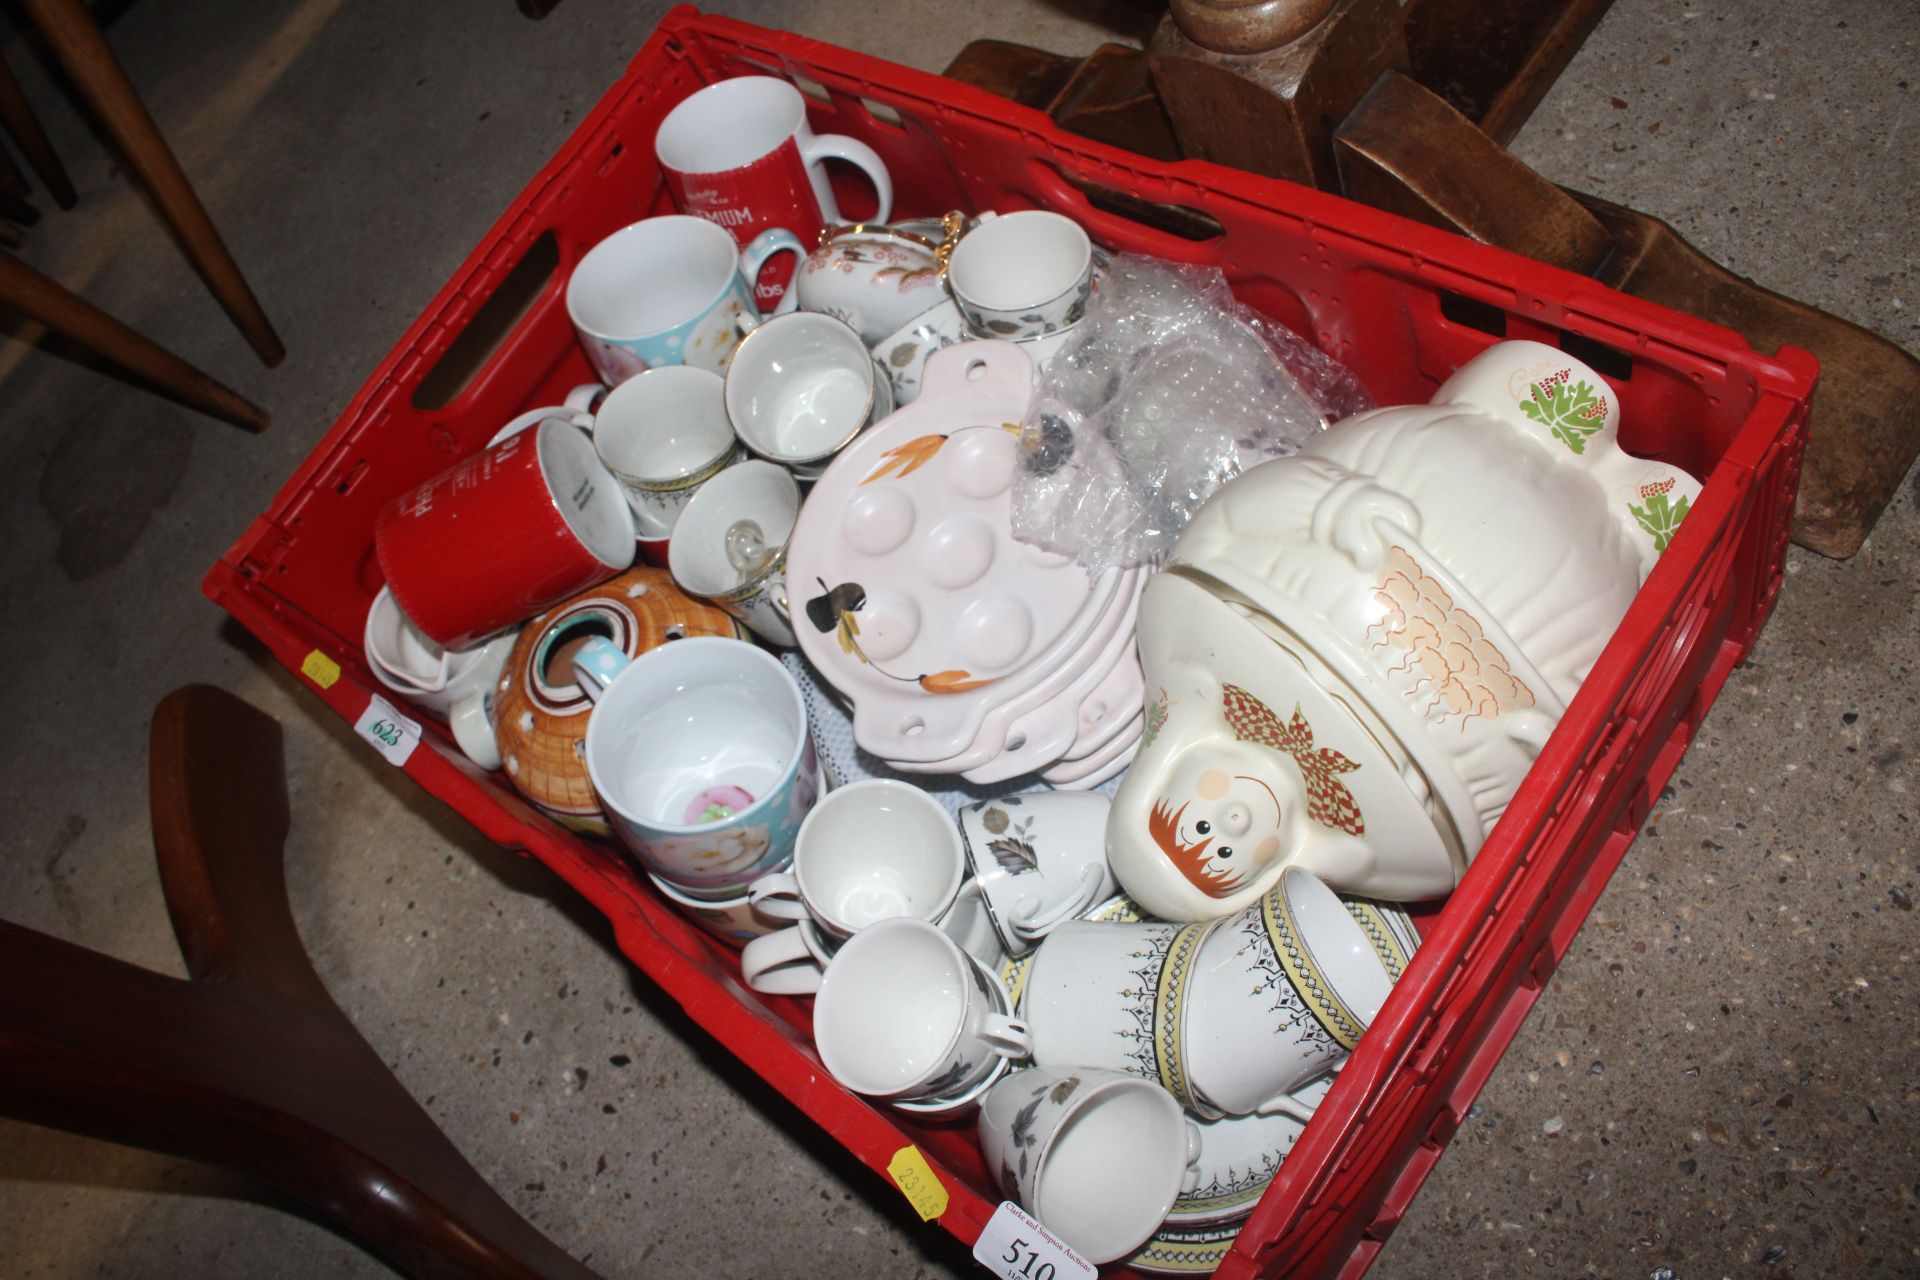 A tray containing miscellaneous teaware, storage j